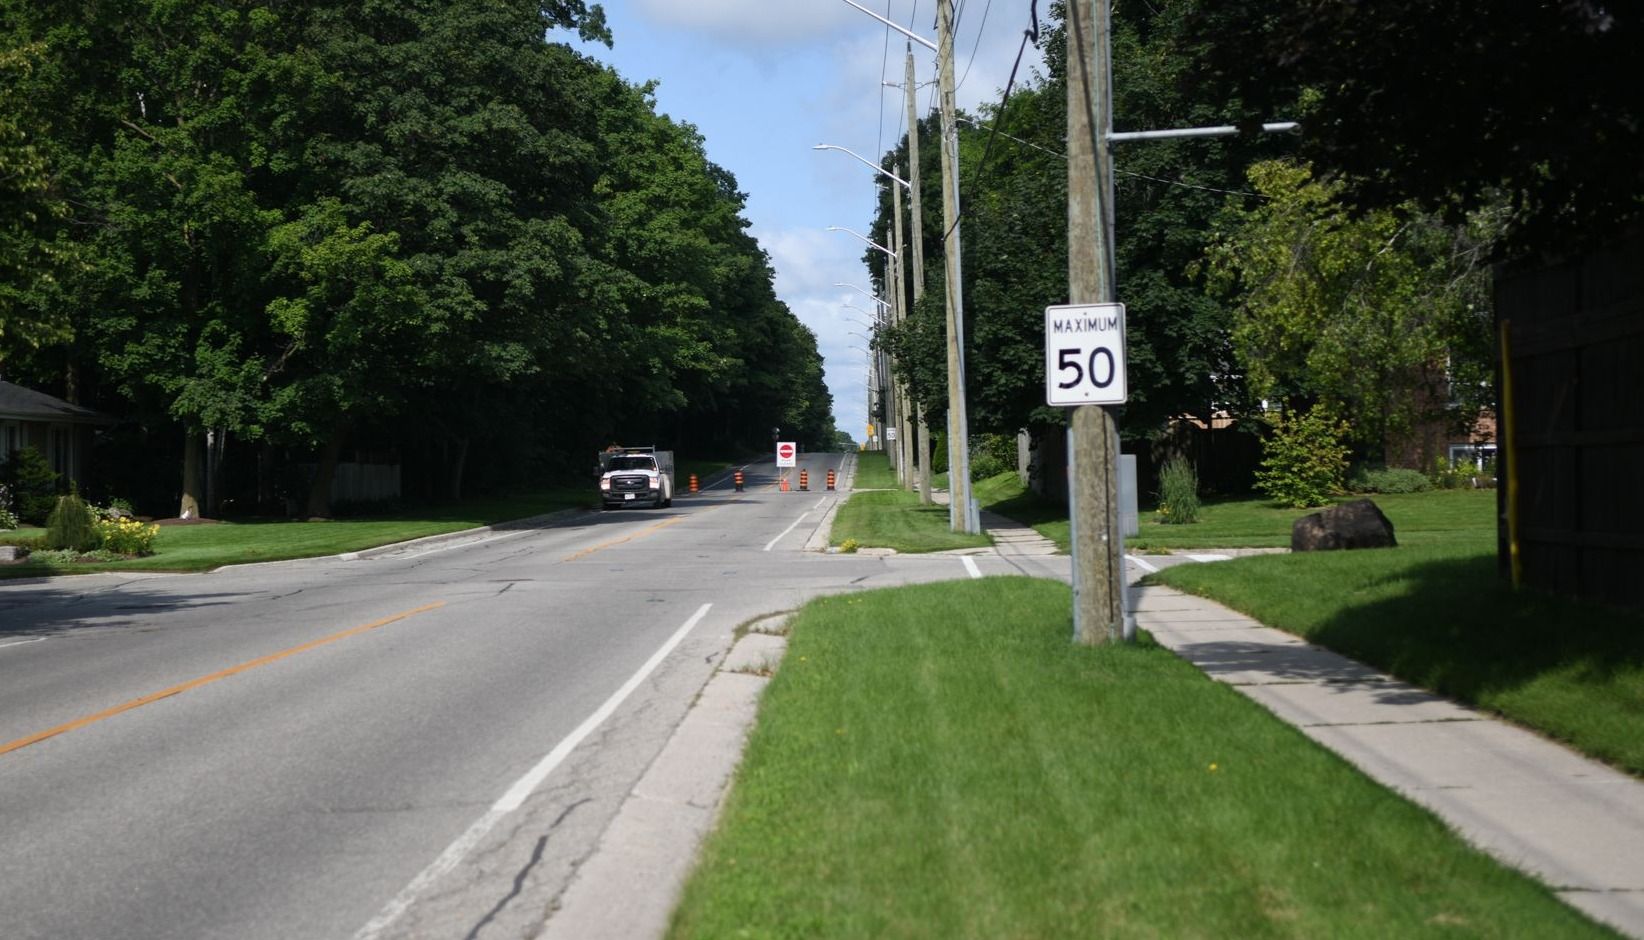                      Police, township dealing with theft of traffic bollards in Elmira                             
                     